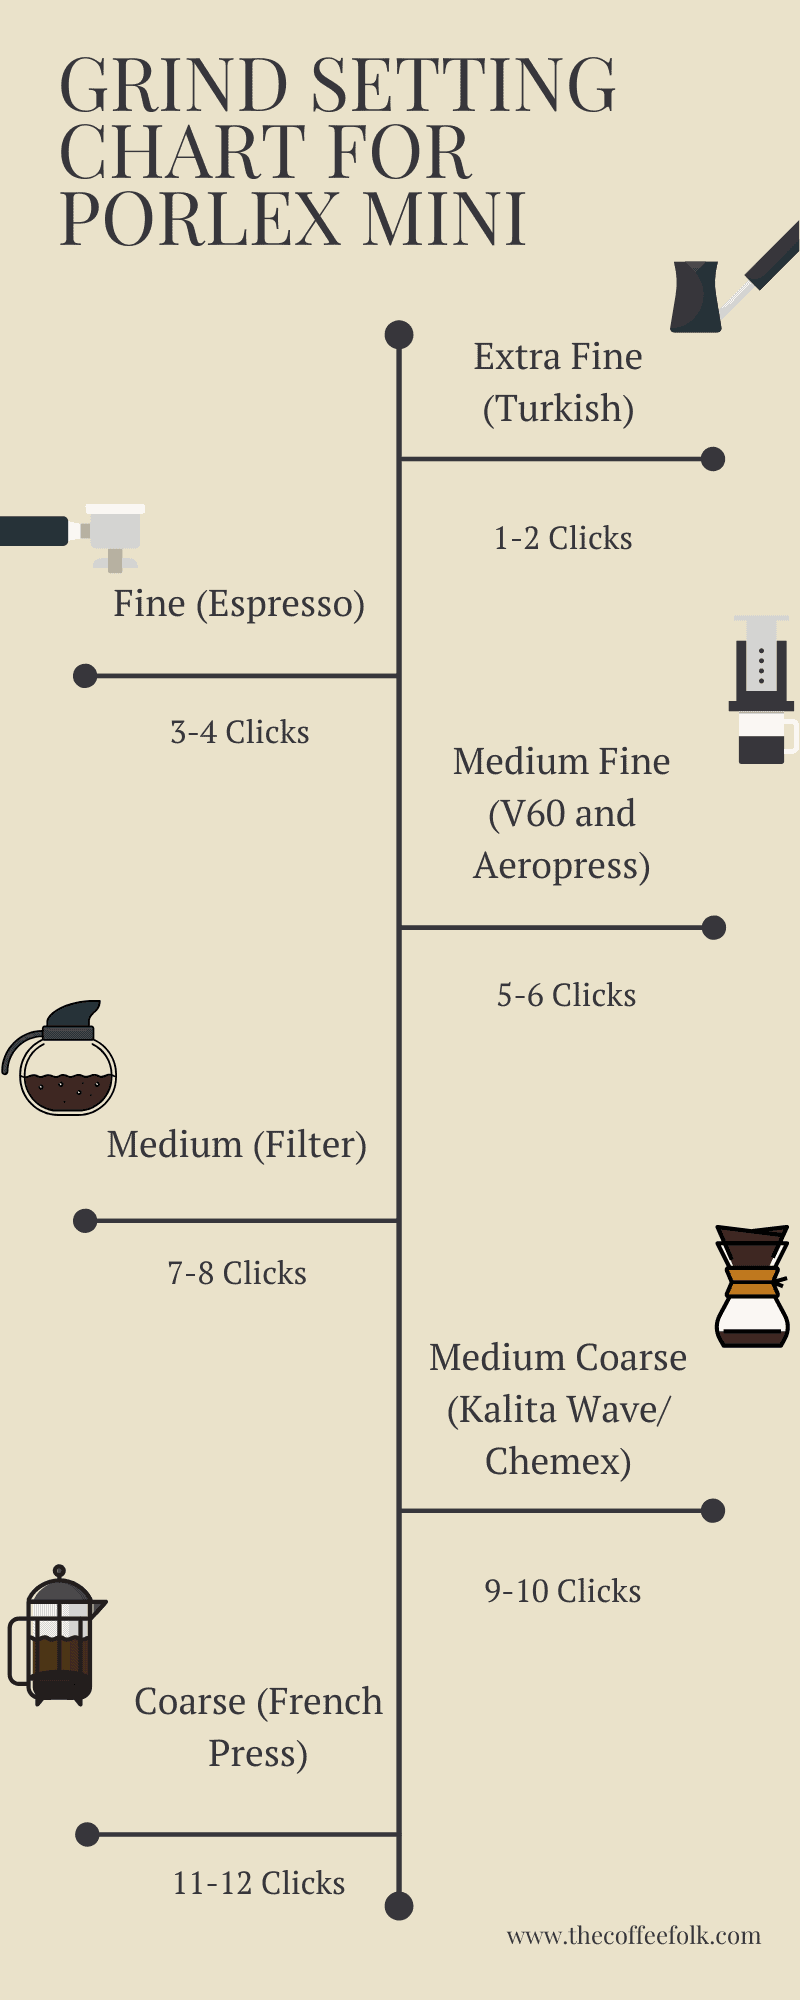 Diagram of what grind settings to use on Porlex Mini for Aeropress, V60, Filter, Chemex and French Press Coffee